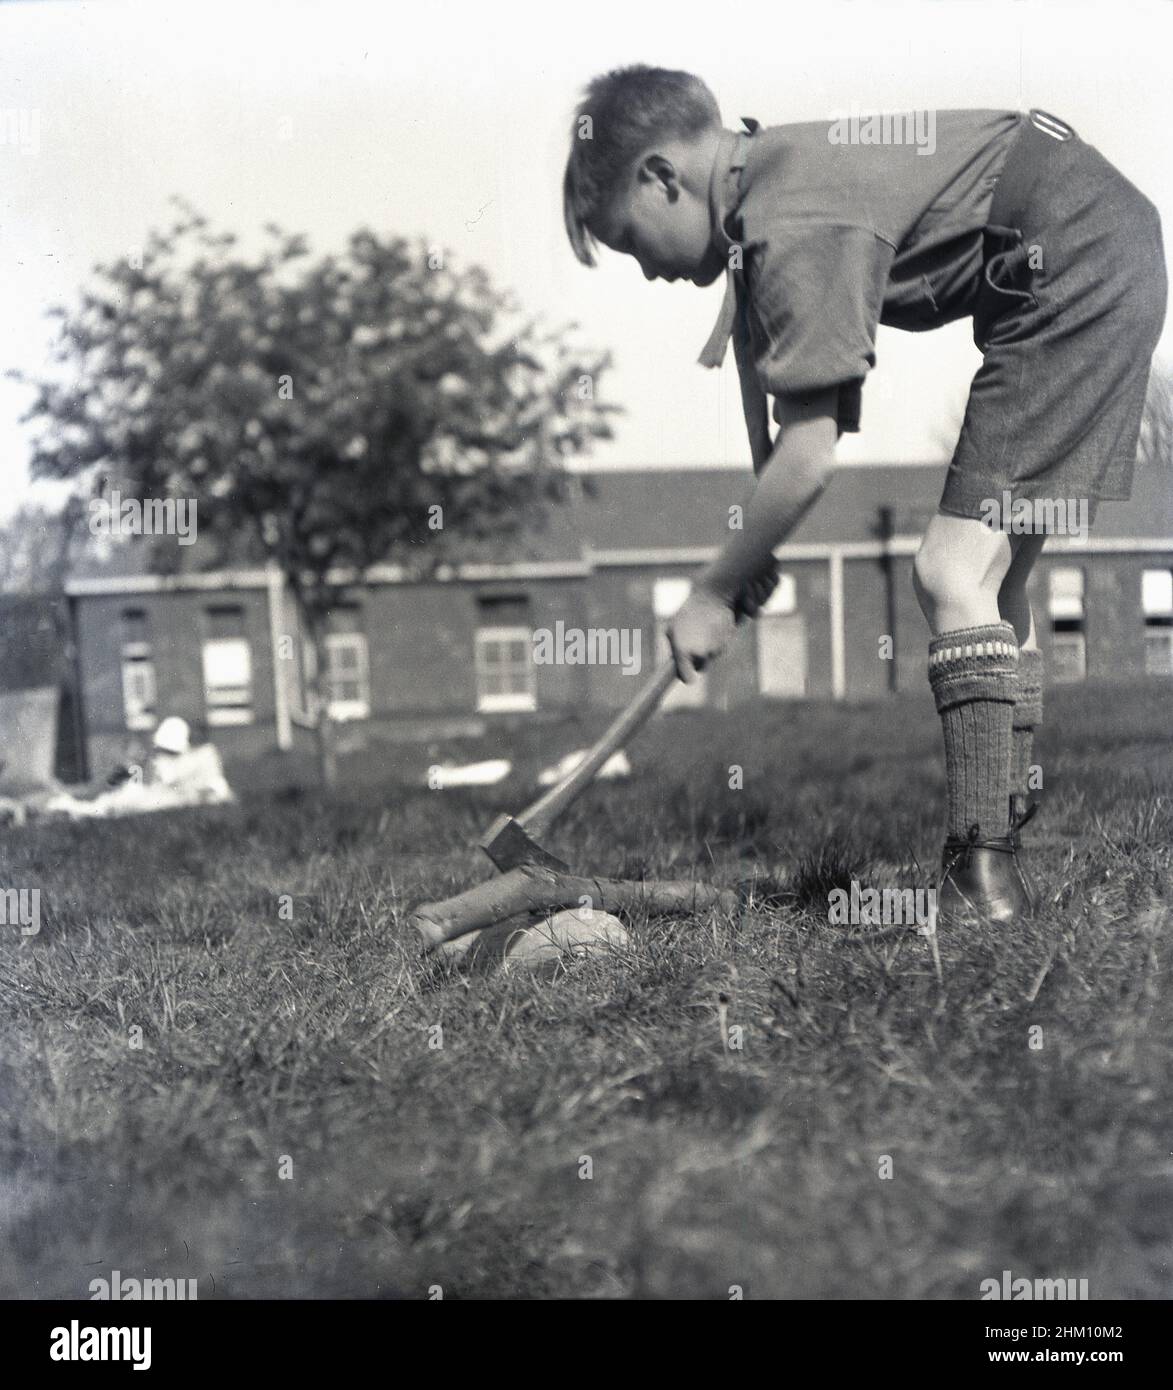 1942, historical, a cub scout in his uniform using an axe, to chop a tree branch in the grounds of Queen Mary's Hospital in Carshalton, Surrey, England, UK. Opened in 1908 as the Southern Hospital, in 1909 it became a place for the poor and sick children of London, many who had TB and was renamed the Children's Infirmary. The young patients were housed in single storey ward blocks. In 1915 it was renamed the Queen Mary's Hospital for Children when Her Majesty became its patron. During WW2, scouts who has been injured during the Blitz or were sick were sent there for treatment and to recover. Stock Photo